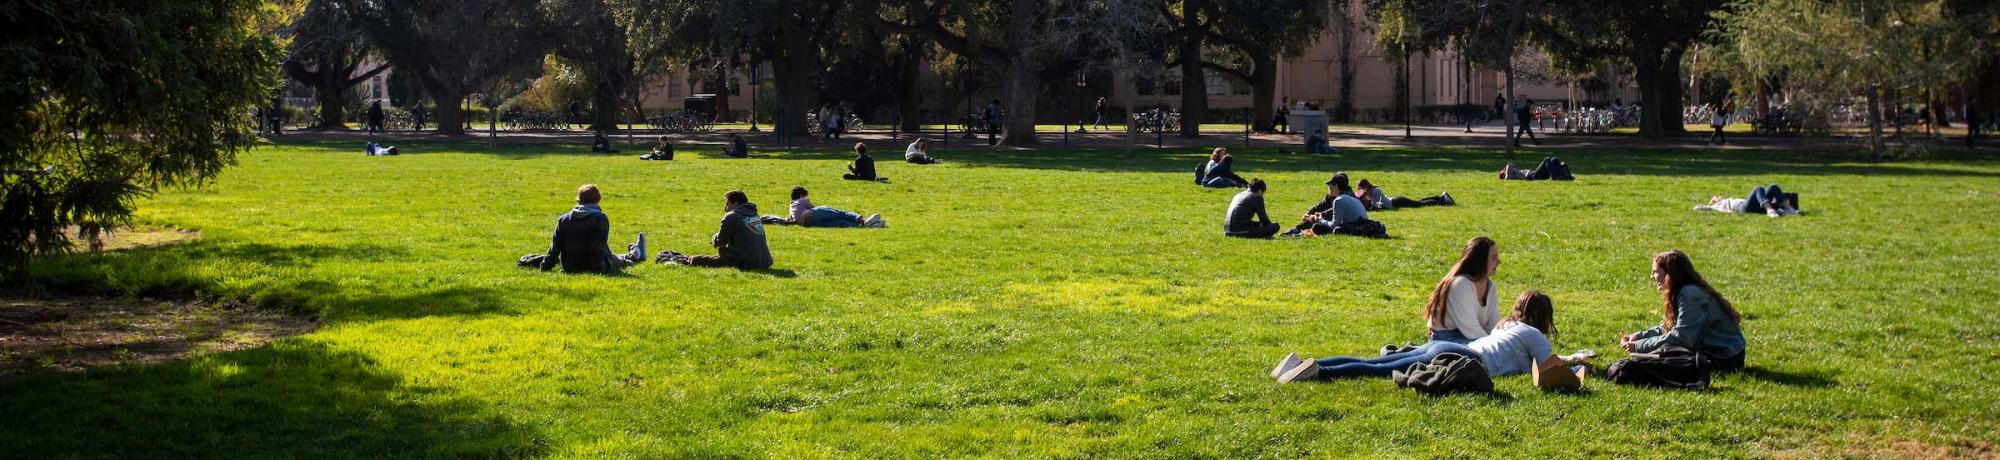 Students relax on the quad of UC Davis campus with trees in the background.